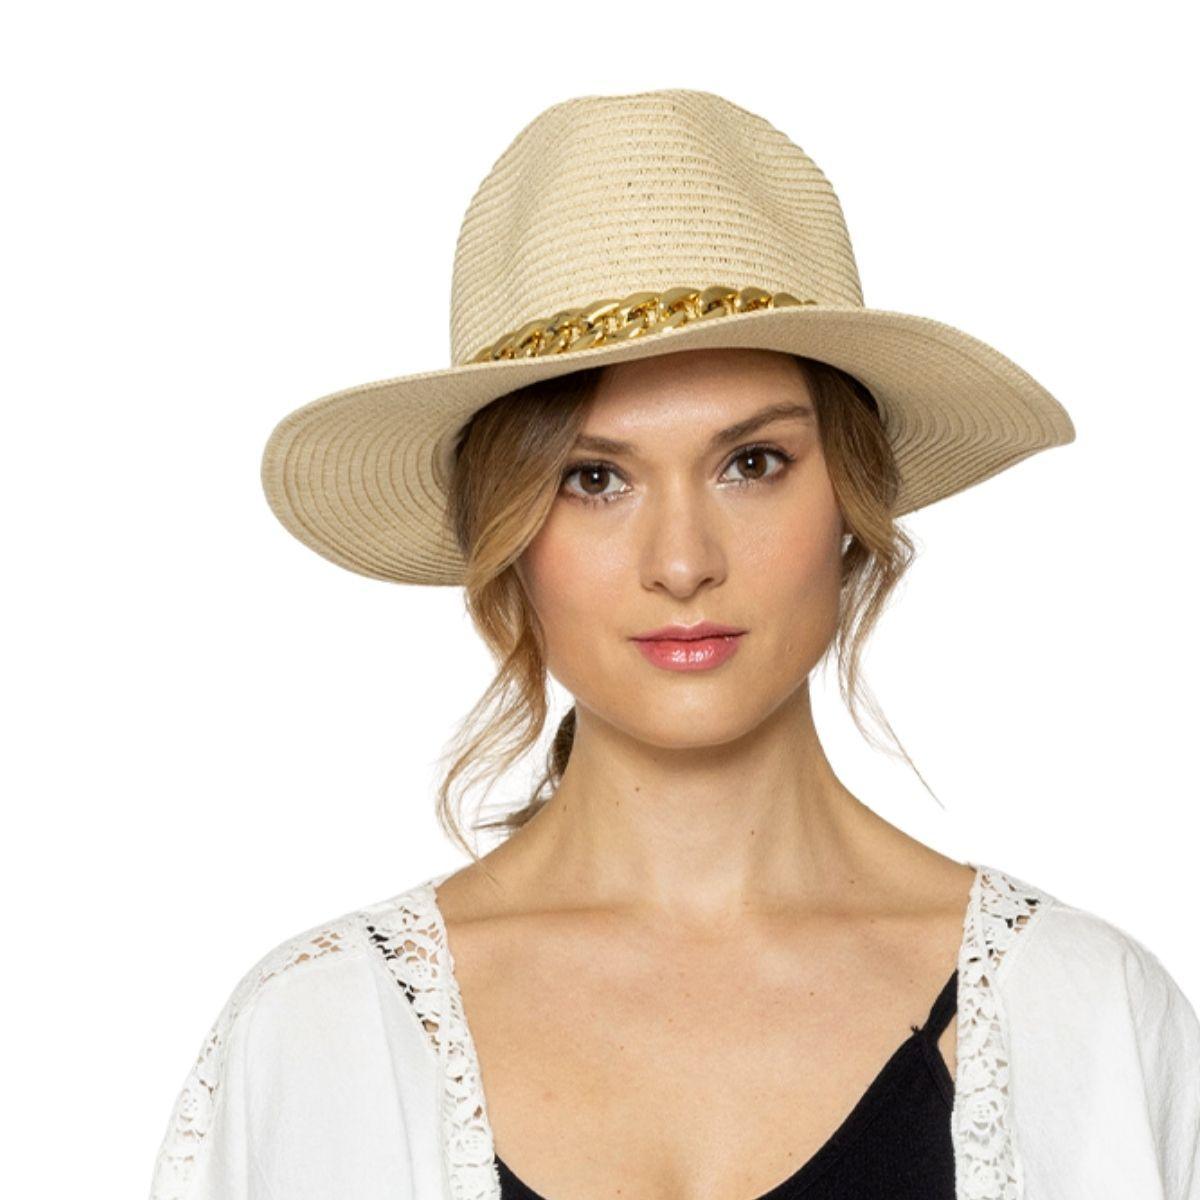 Panama Hat in Ivory with Chain Band Detail for Women